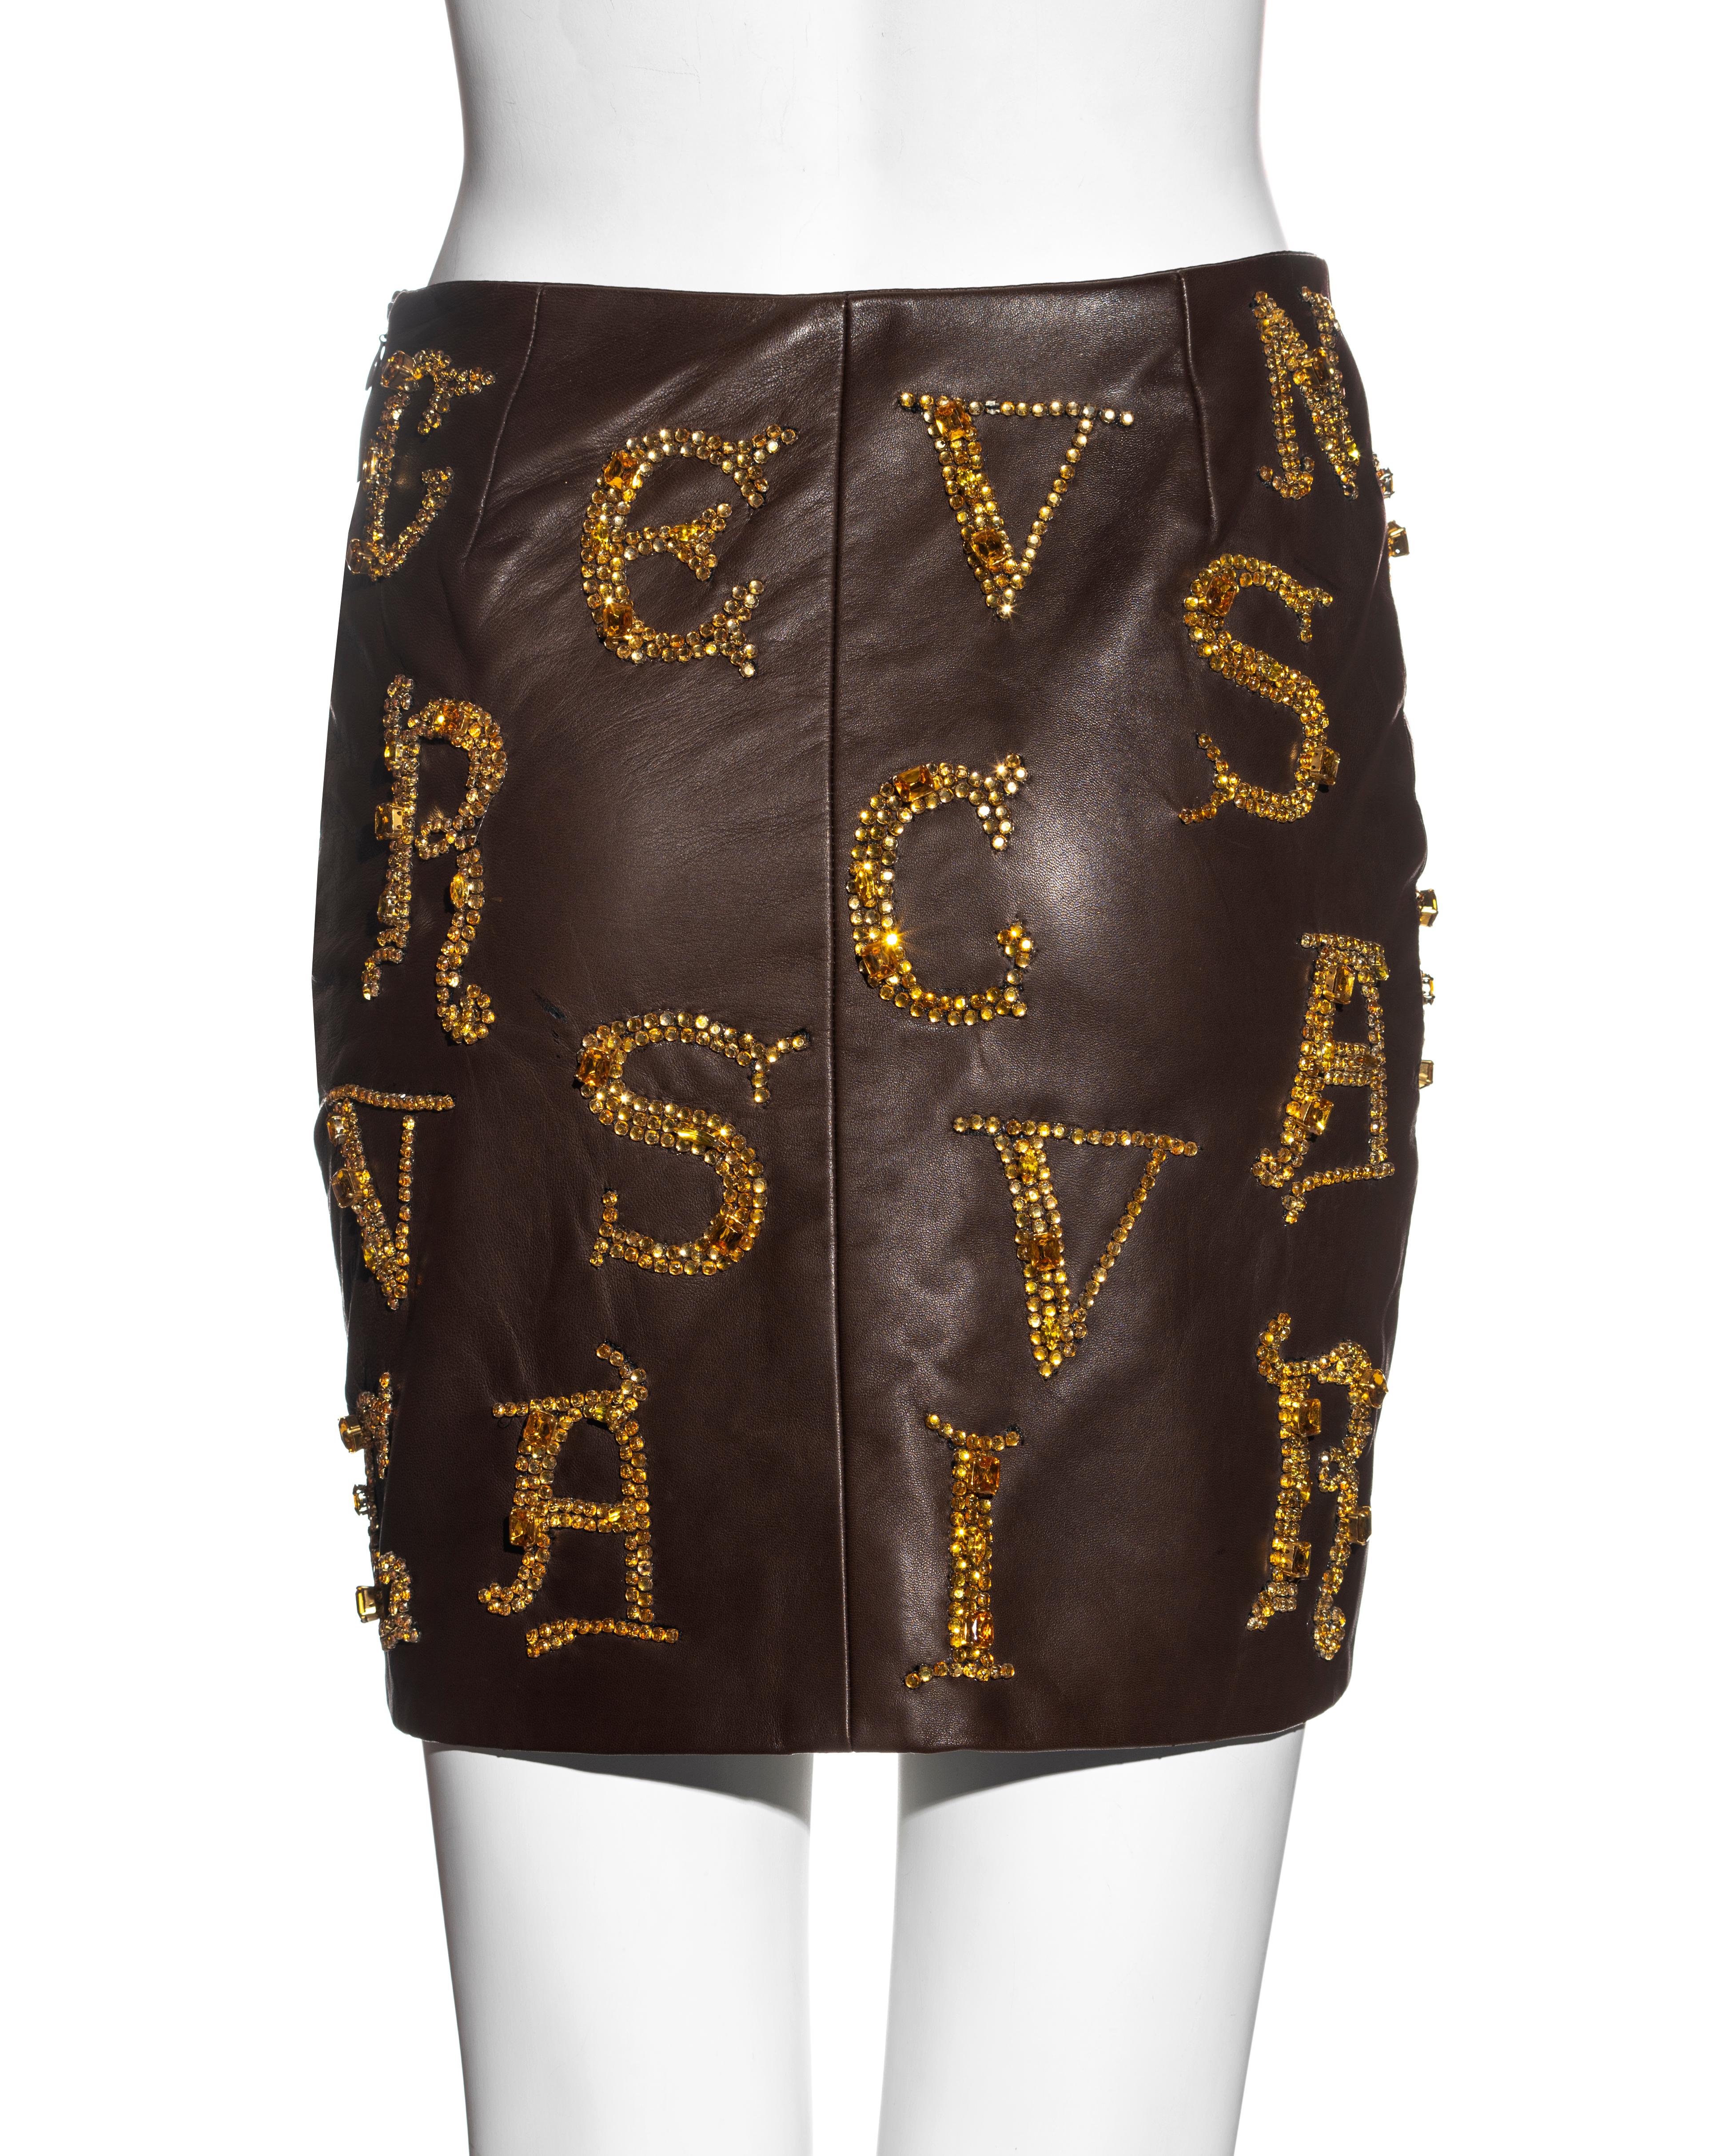 Atelier Versace brown leather skirt with gold crystal calligraphy, fw 1997 For Sale 4